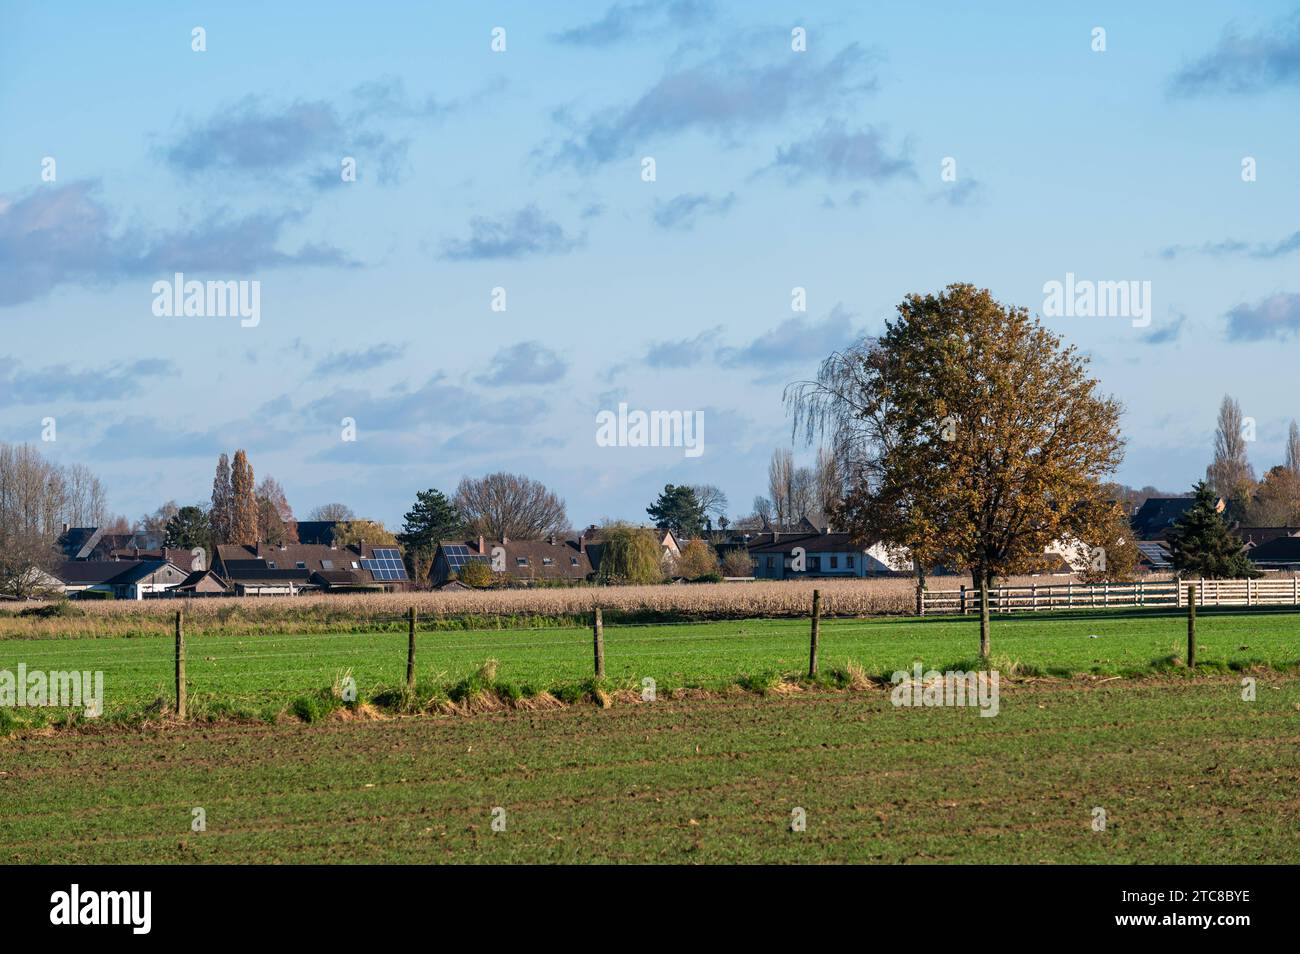 Green and brown agriculture fields around Saint Brixius Rode, Flemish Brabant Region, Belgium Credit: Imago/Alamy Live News Stock Photo